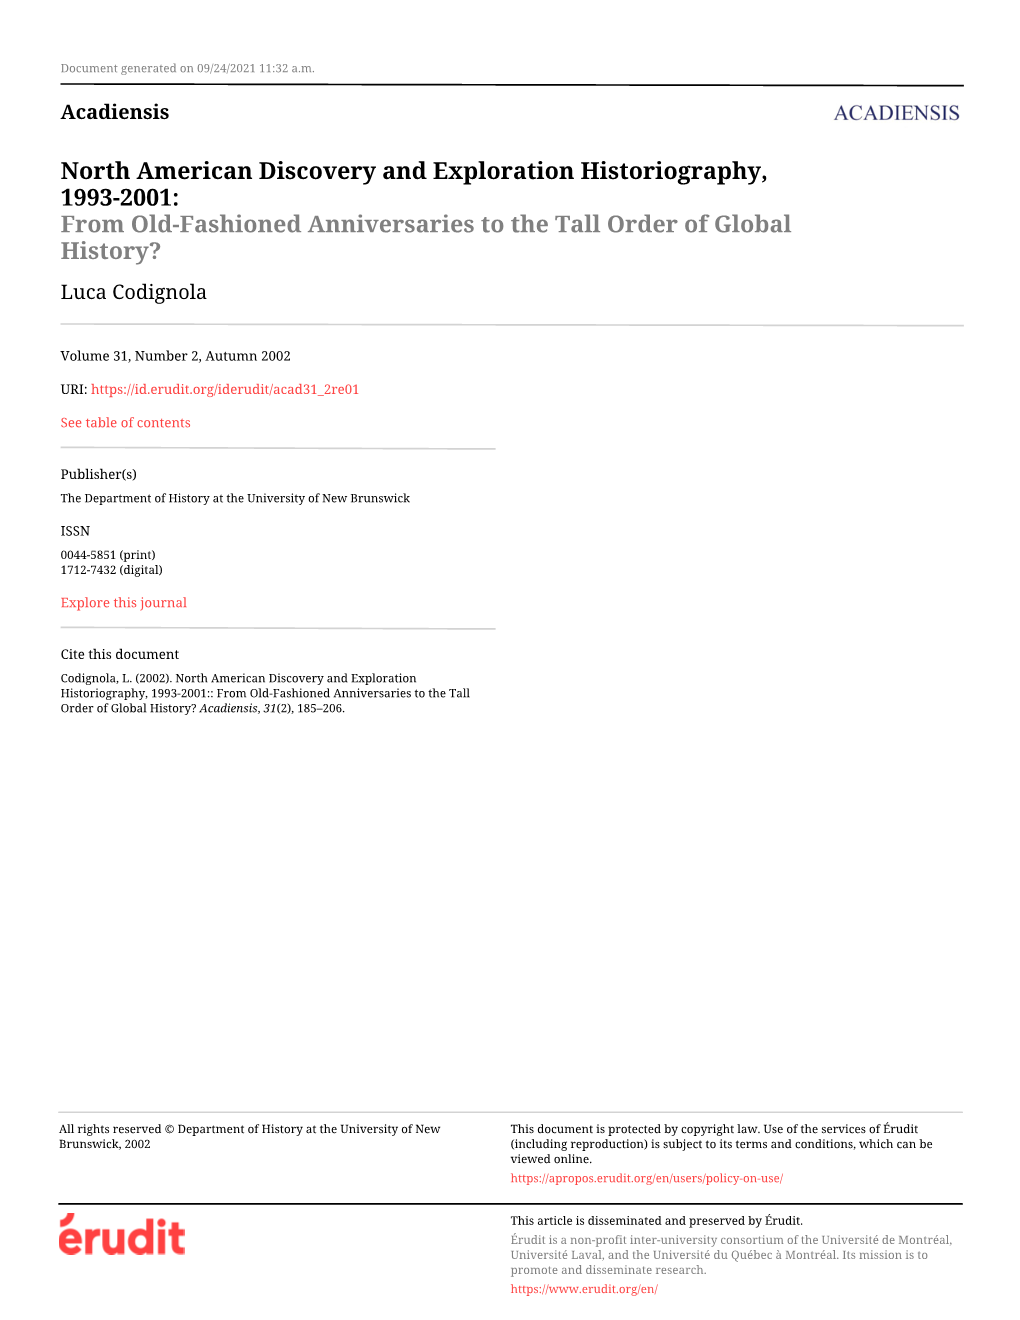 North American Discovery and Exploration Historiography, 1993-2001: from Old-Fashioned Anniversaries to the Tall Order of Global History? Luca Codignola